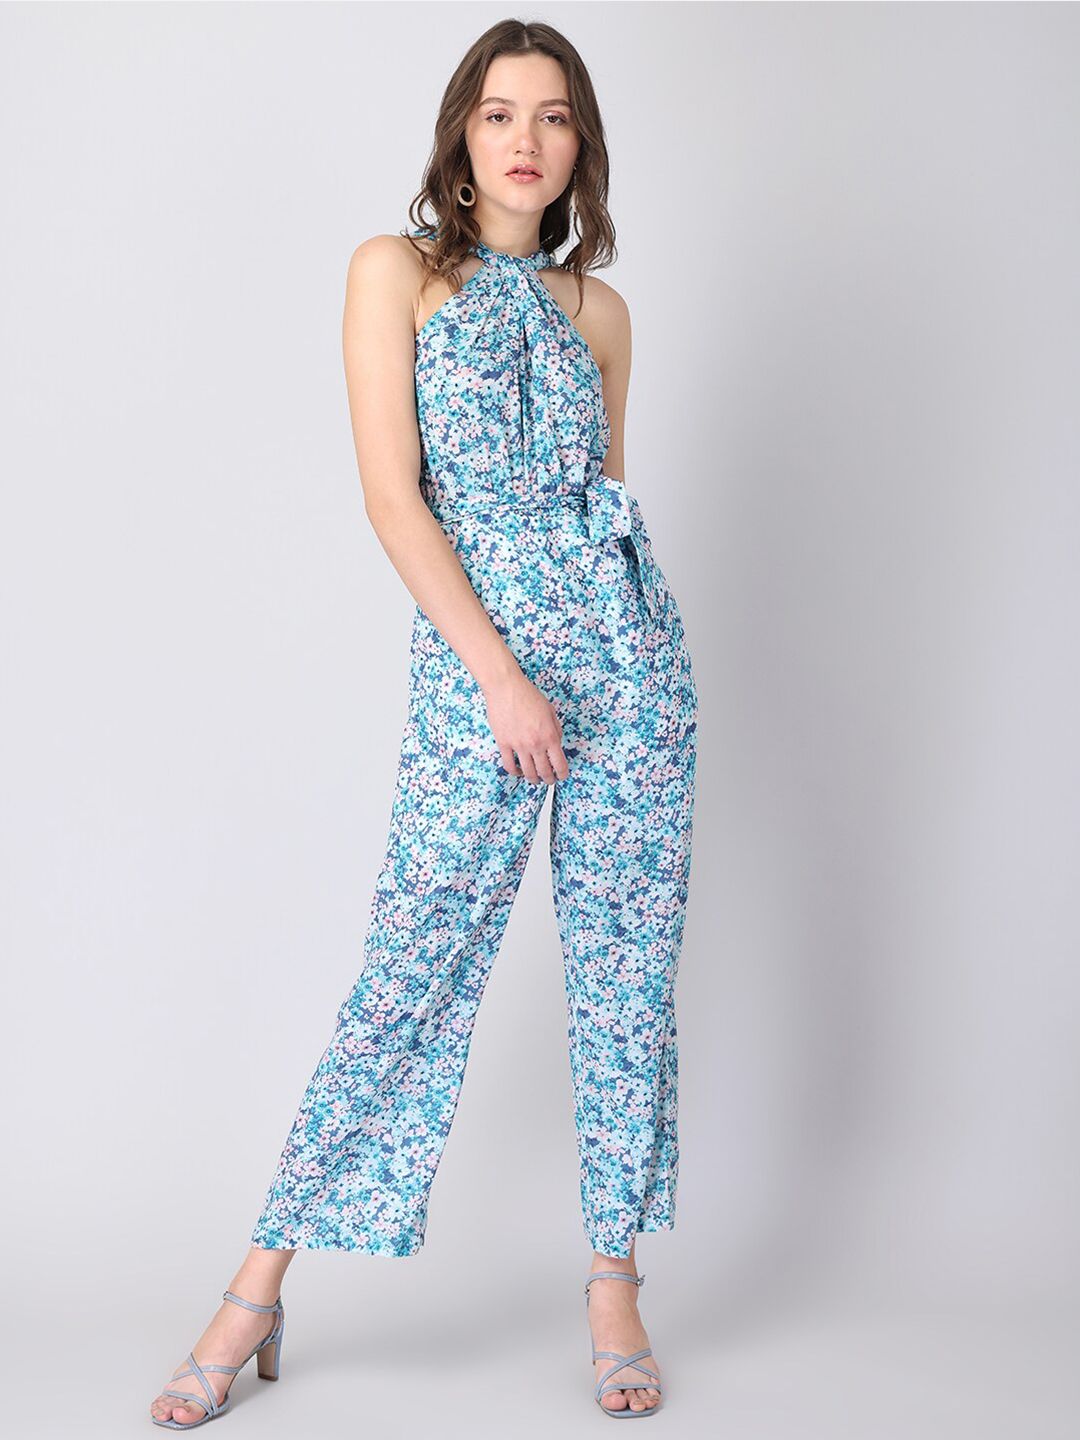 FabAlley Green & Blue Halter Neck Floral Printed Basic Jumpsuit Price in India